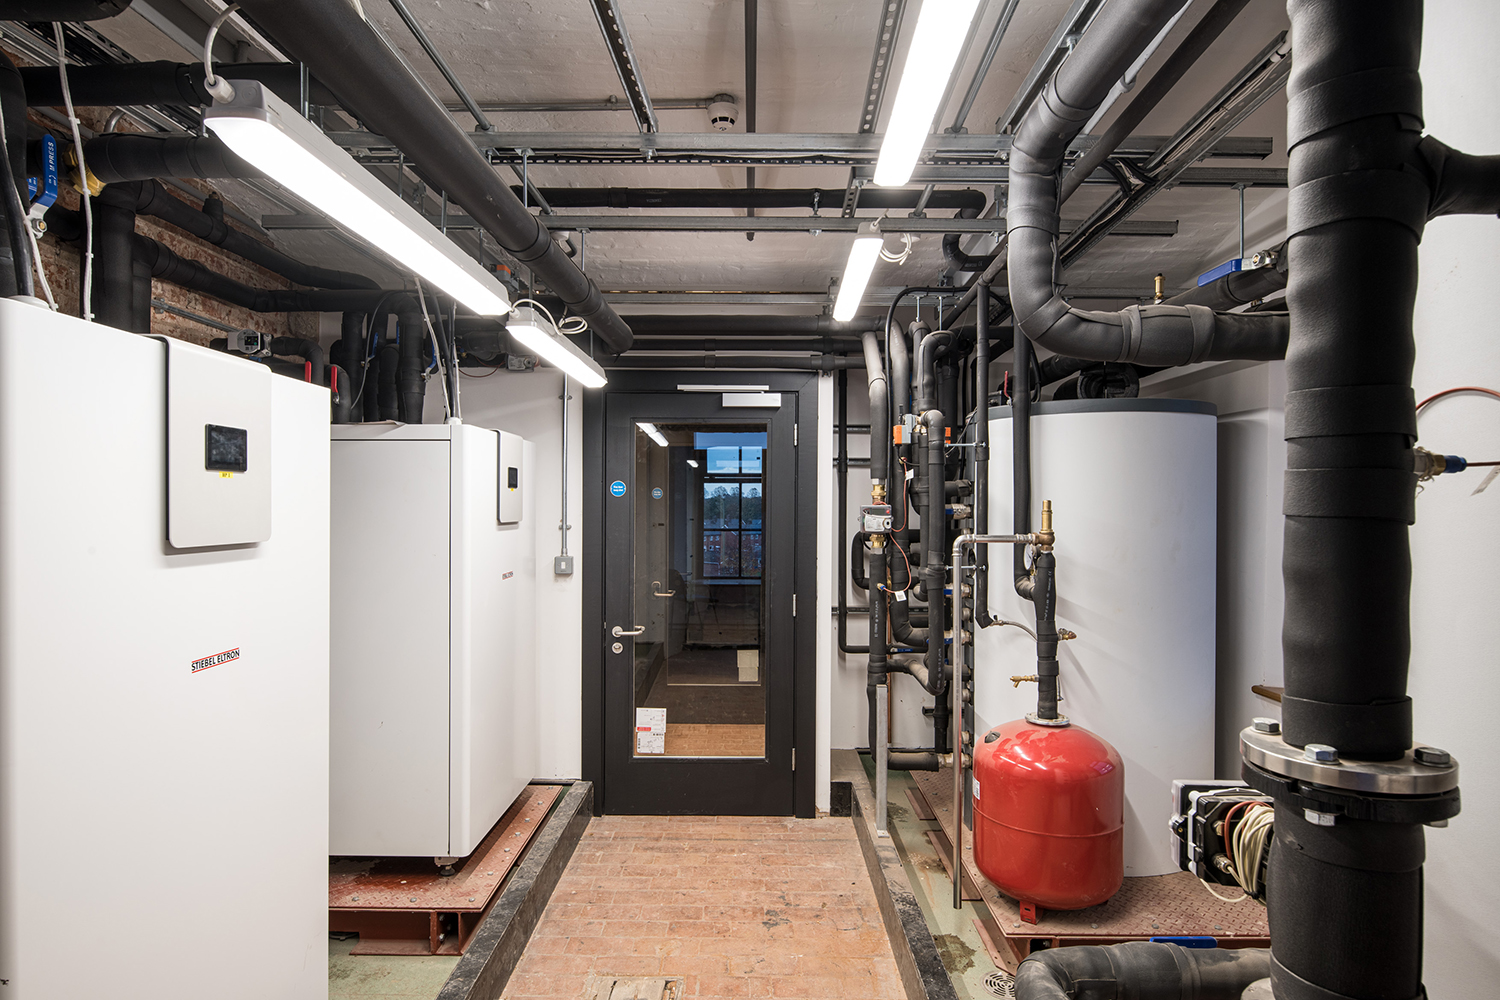 A central walk way with white boxed units on the left, a tall white cylinder and small red cylinder on the right, and black  pipes.